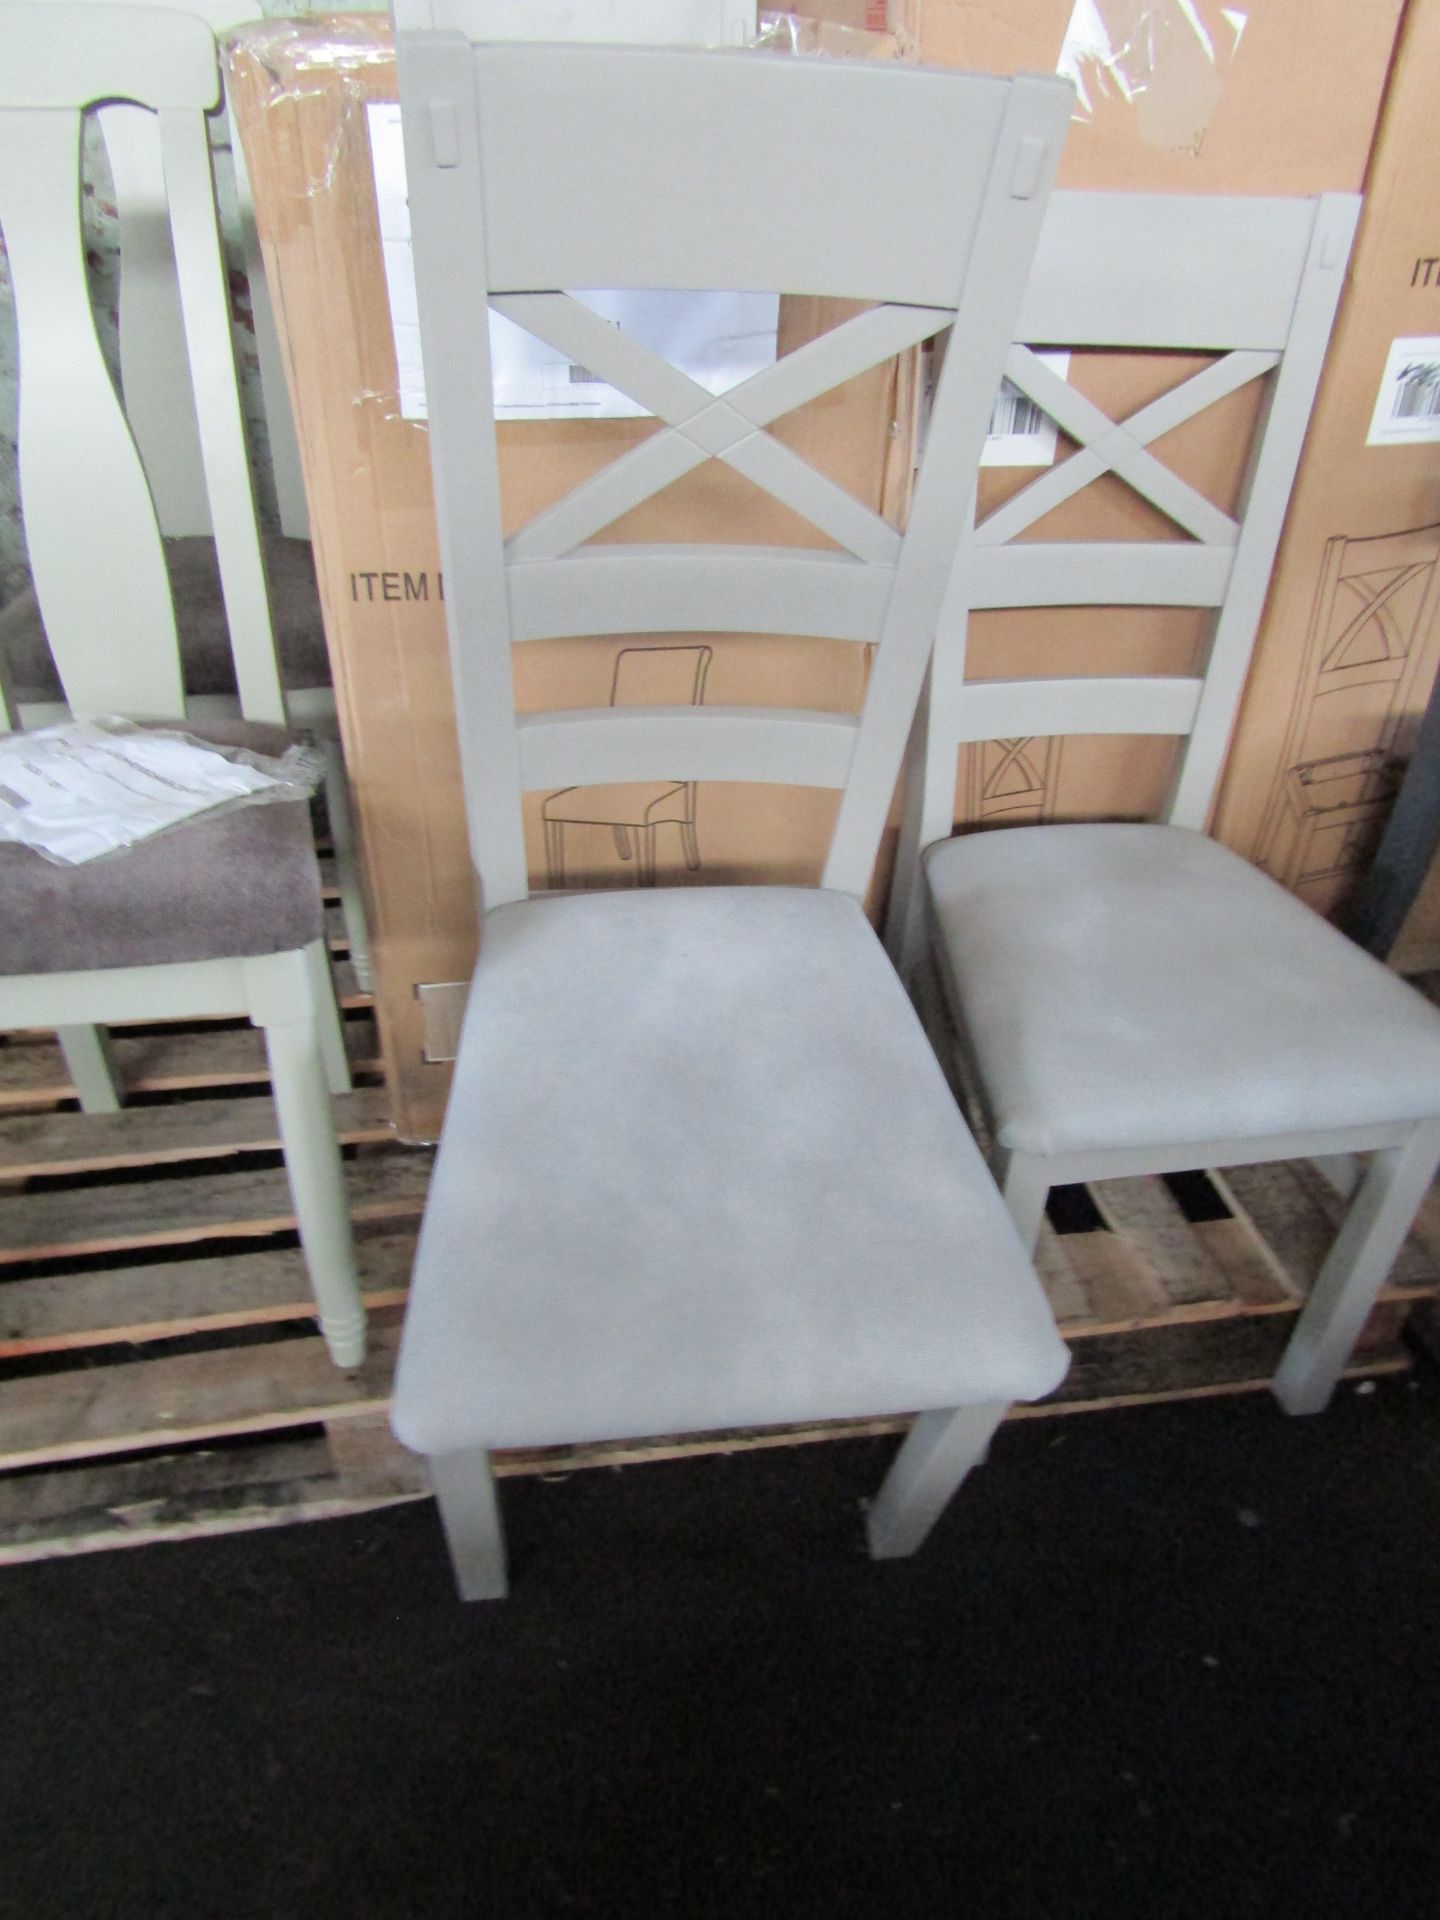 Oak Furnitureland St Ives Light Grey Painted Chair with Dappled Silver Fabric Seat (Pair) RRP 380.00